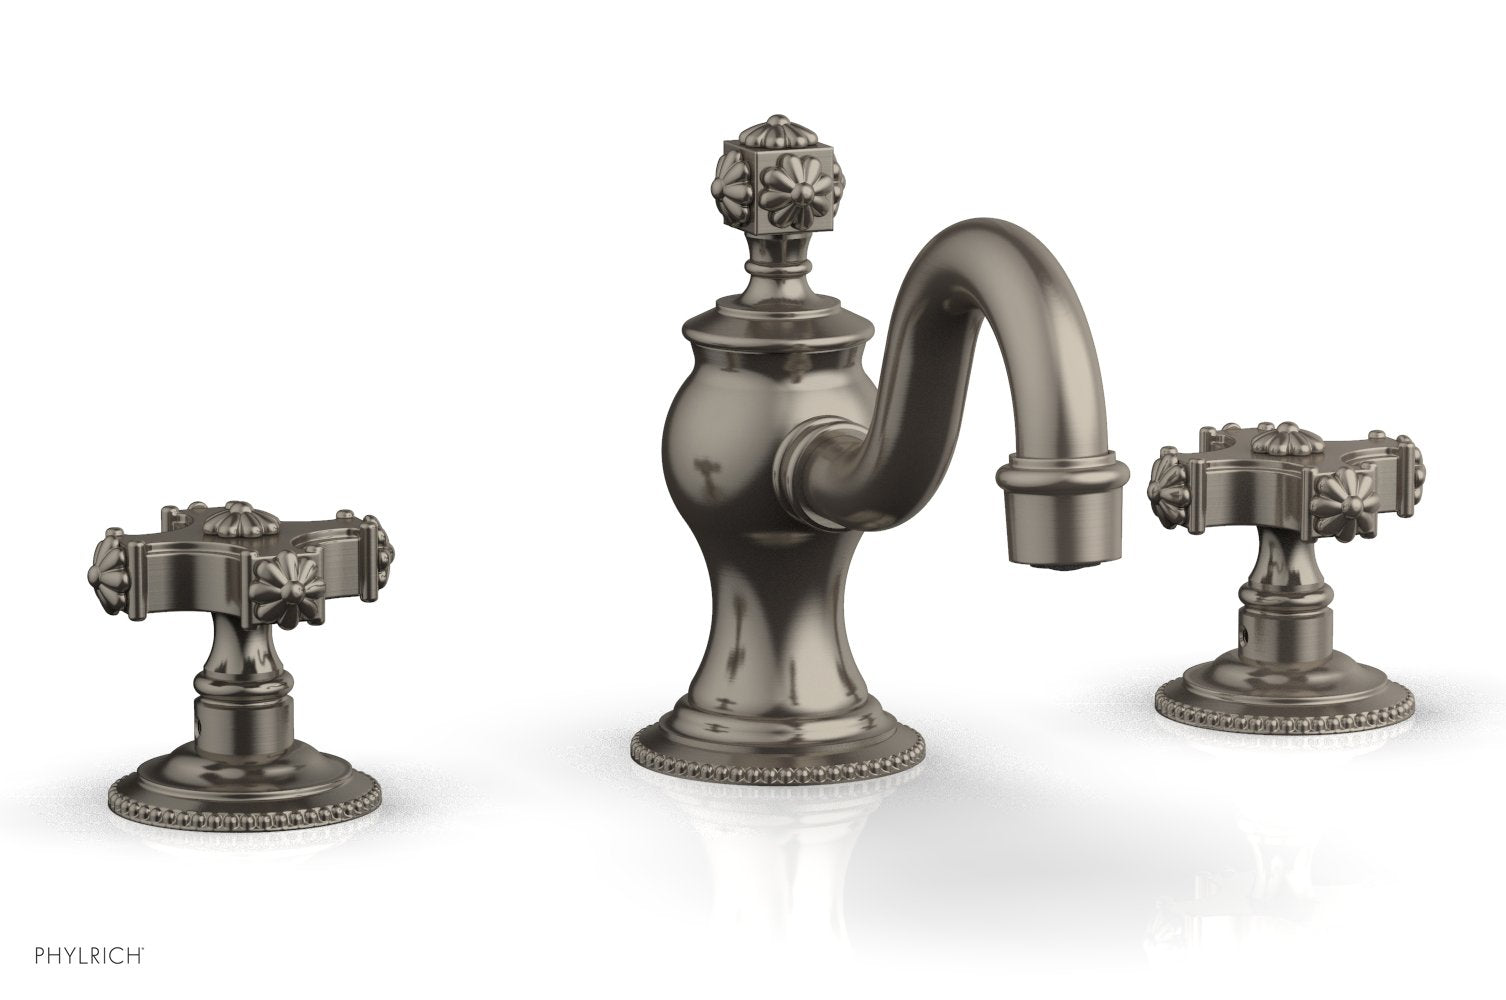 Phylrich MARVELLE Widespread Faucet